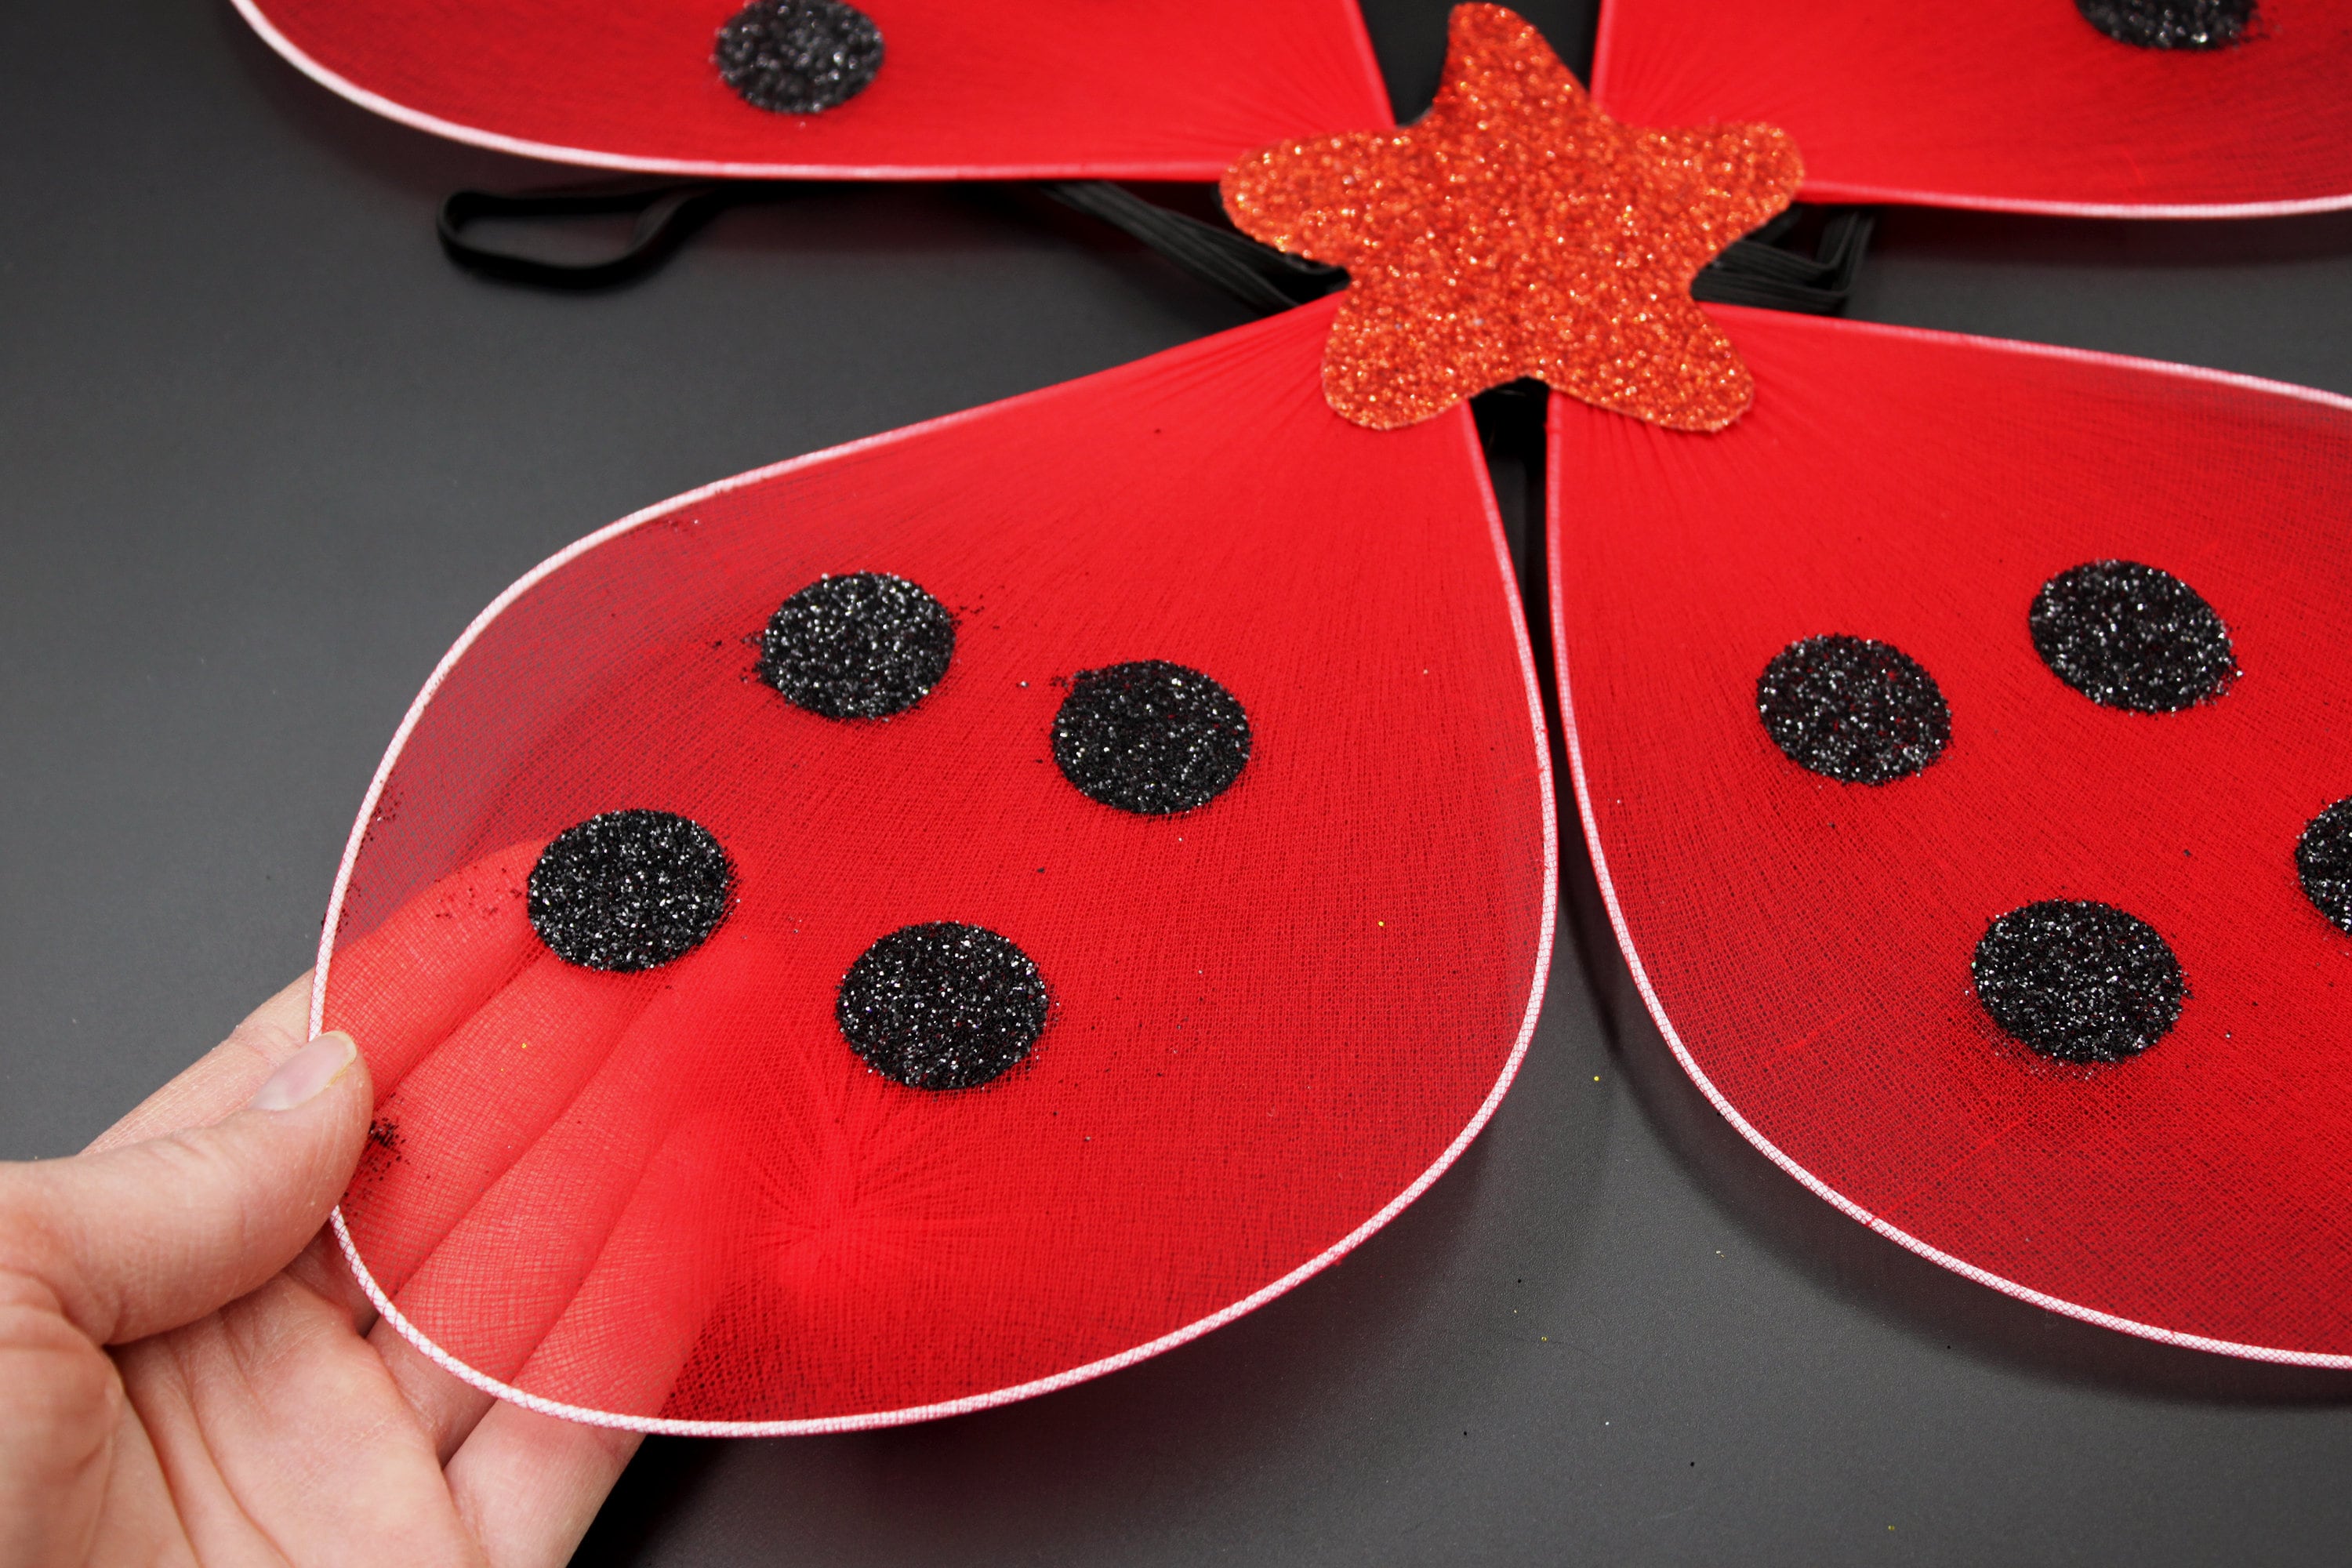 Ladybug Wing Set 2 Pieces Costume Accessory - Only $6.66 at Carnival Source